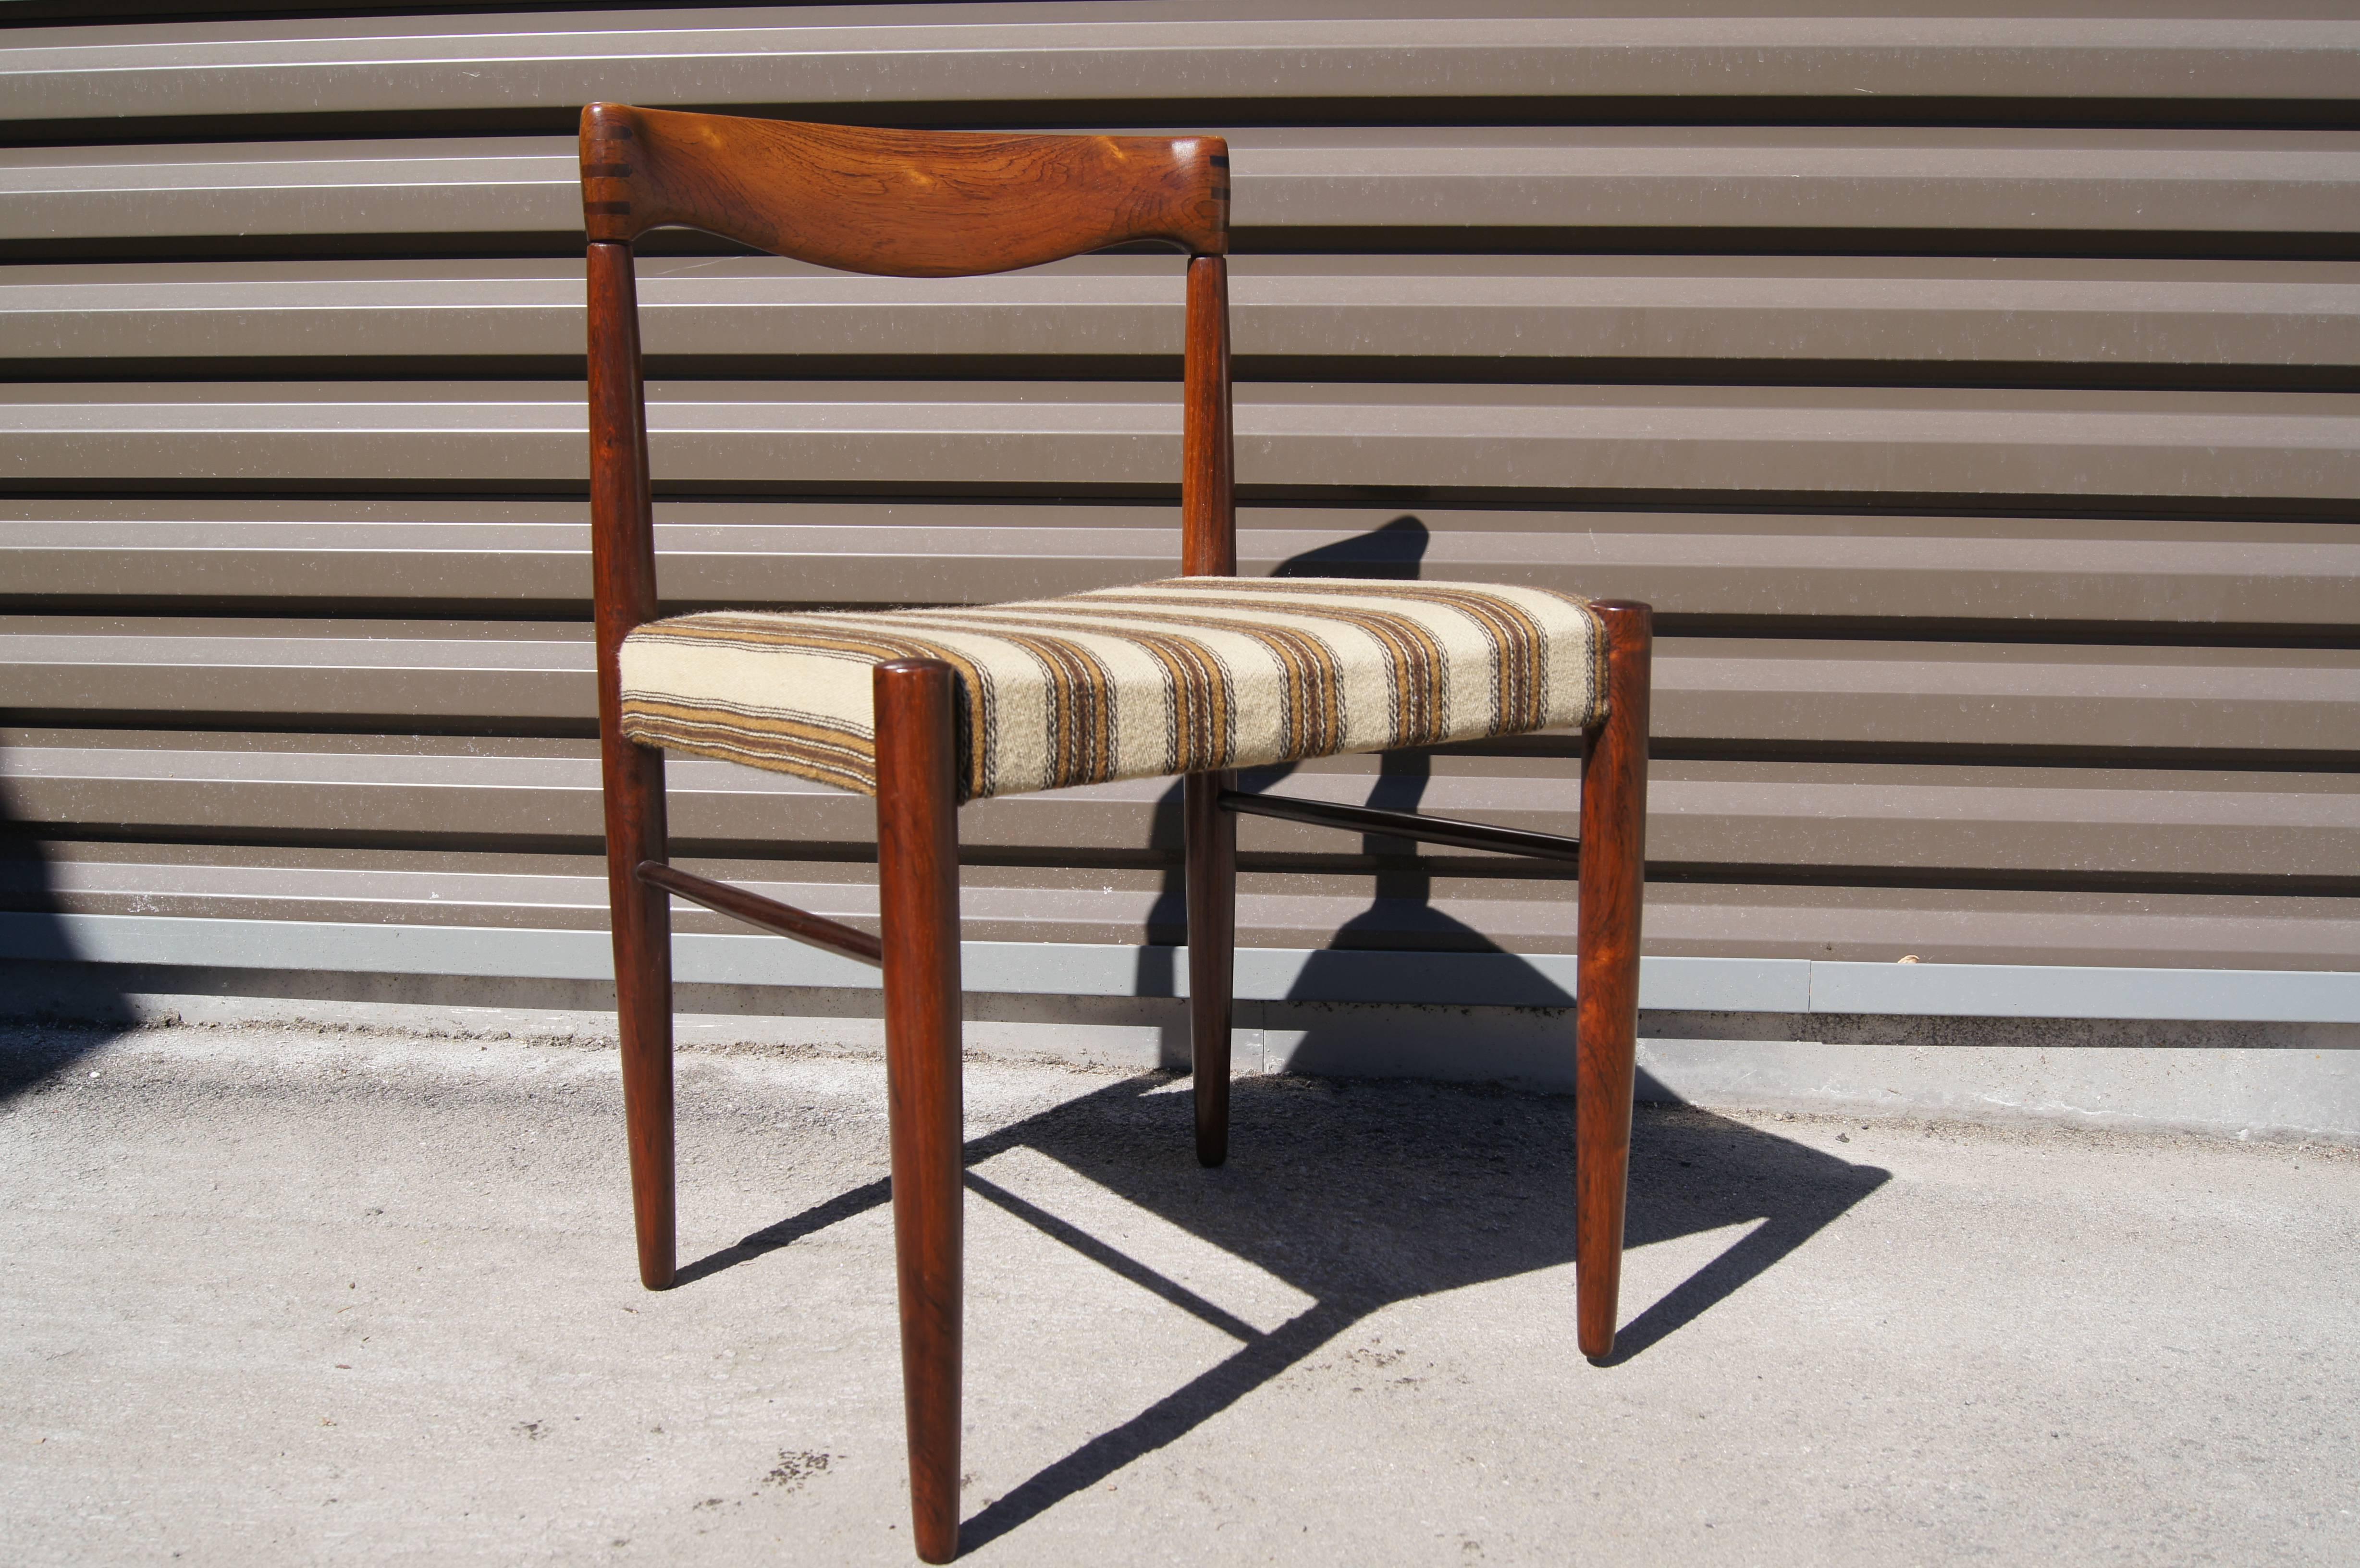 H. W. Klein designed this elegant set of dining chairs for Bramin Møbler in the 1960s. The exposed joints and distinctive curve of the backrest are further enhanced by the rosewood's rich grain.